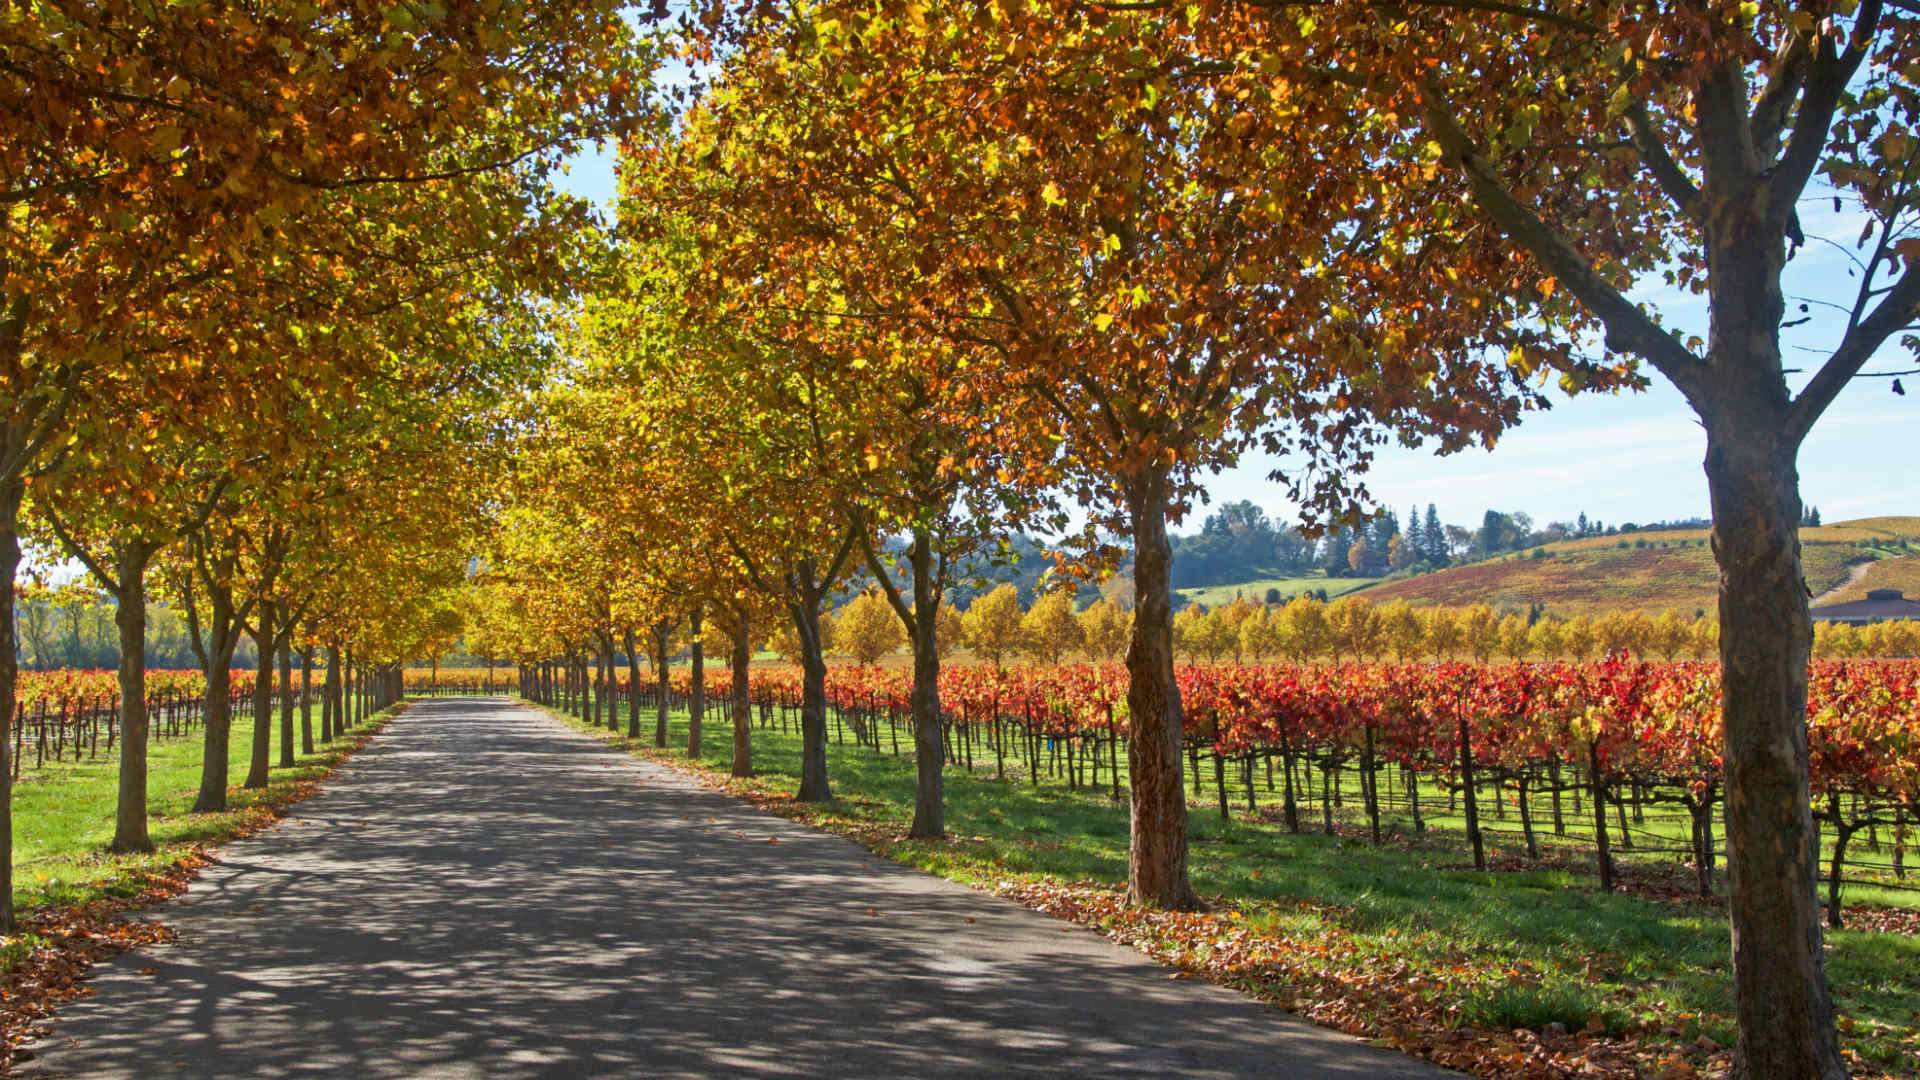 How to Eat and Drink Your Way Around California's Sonoma County